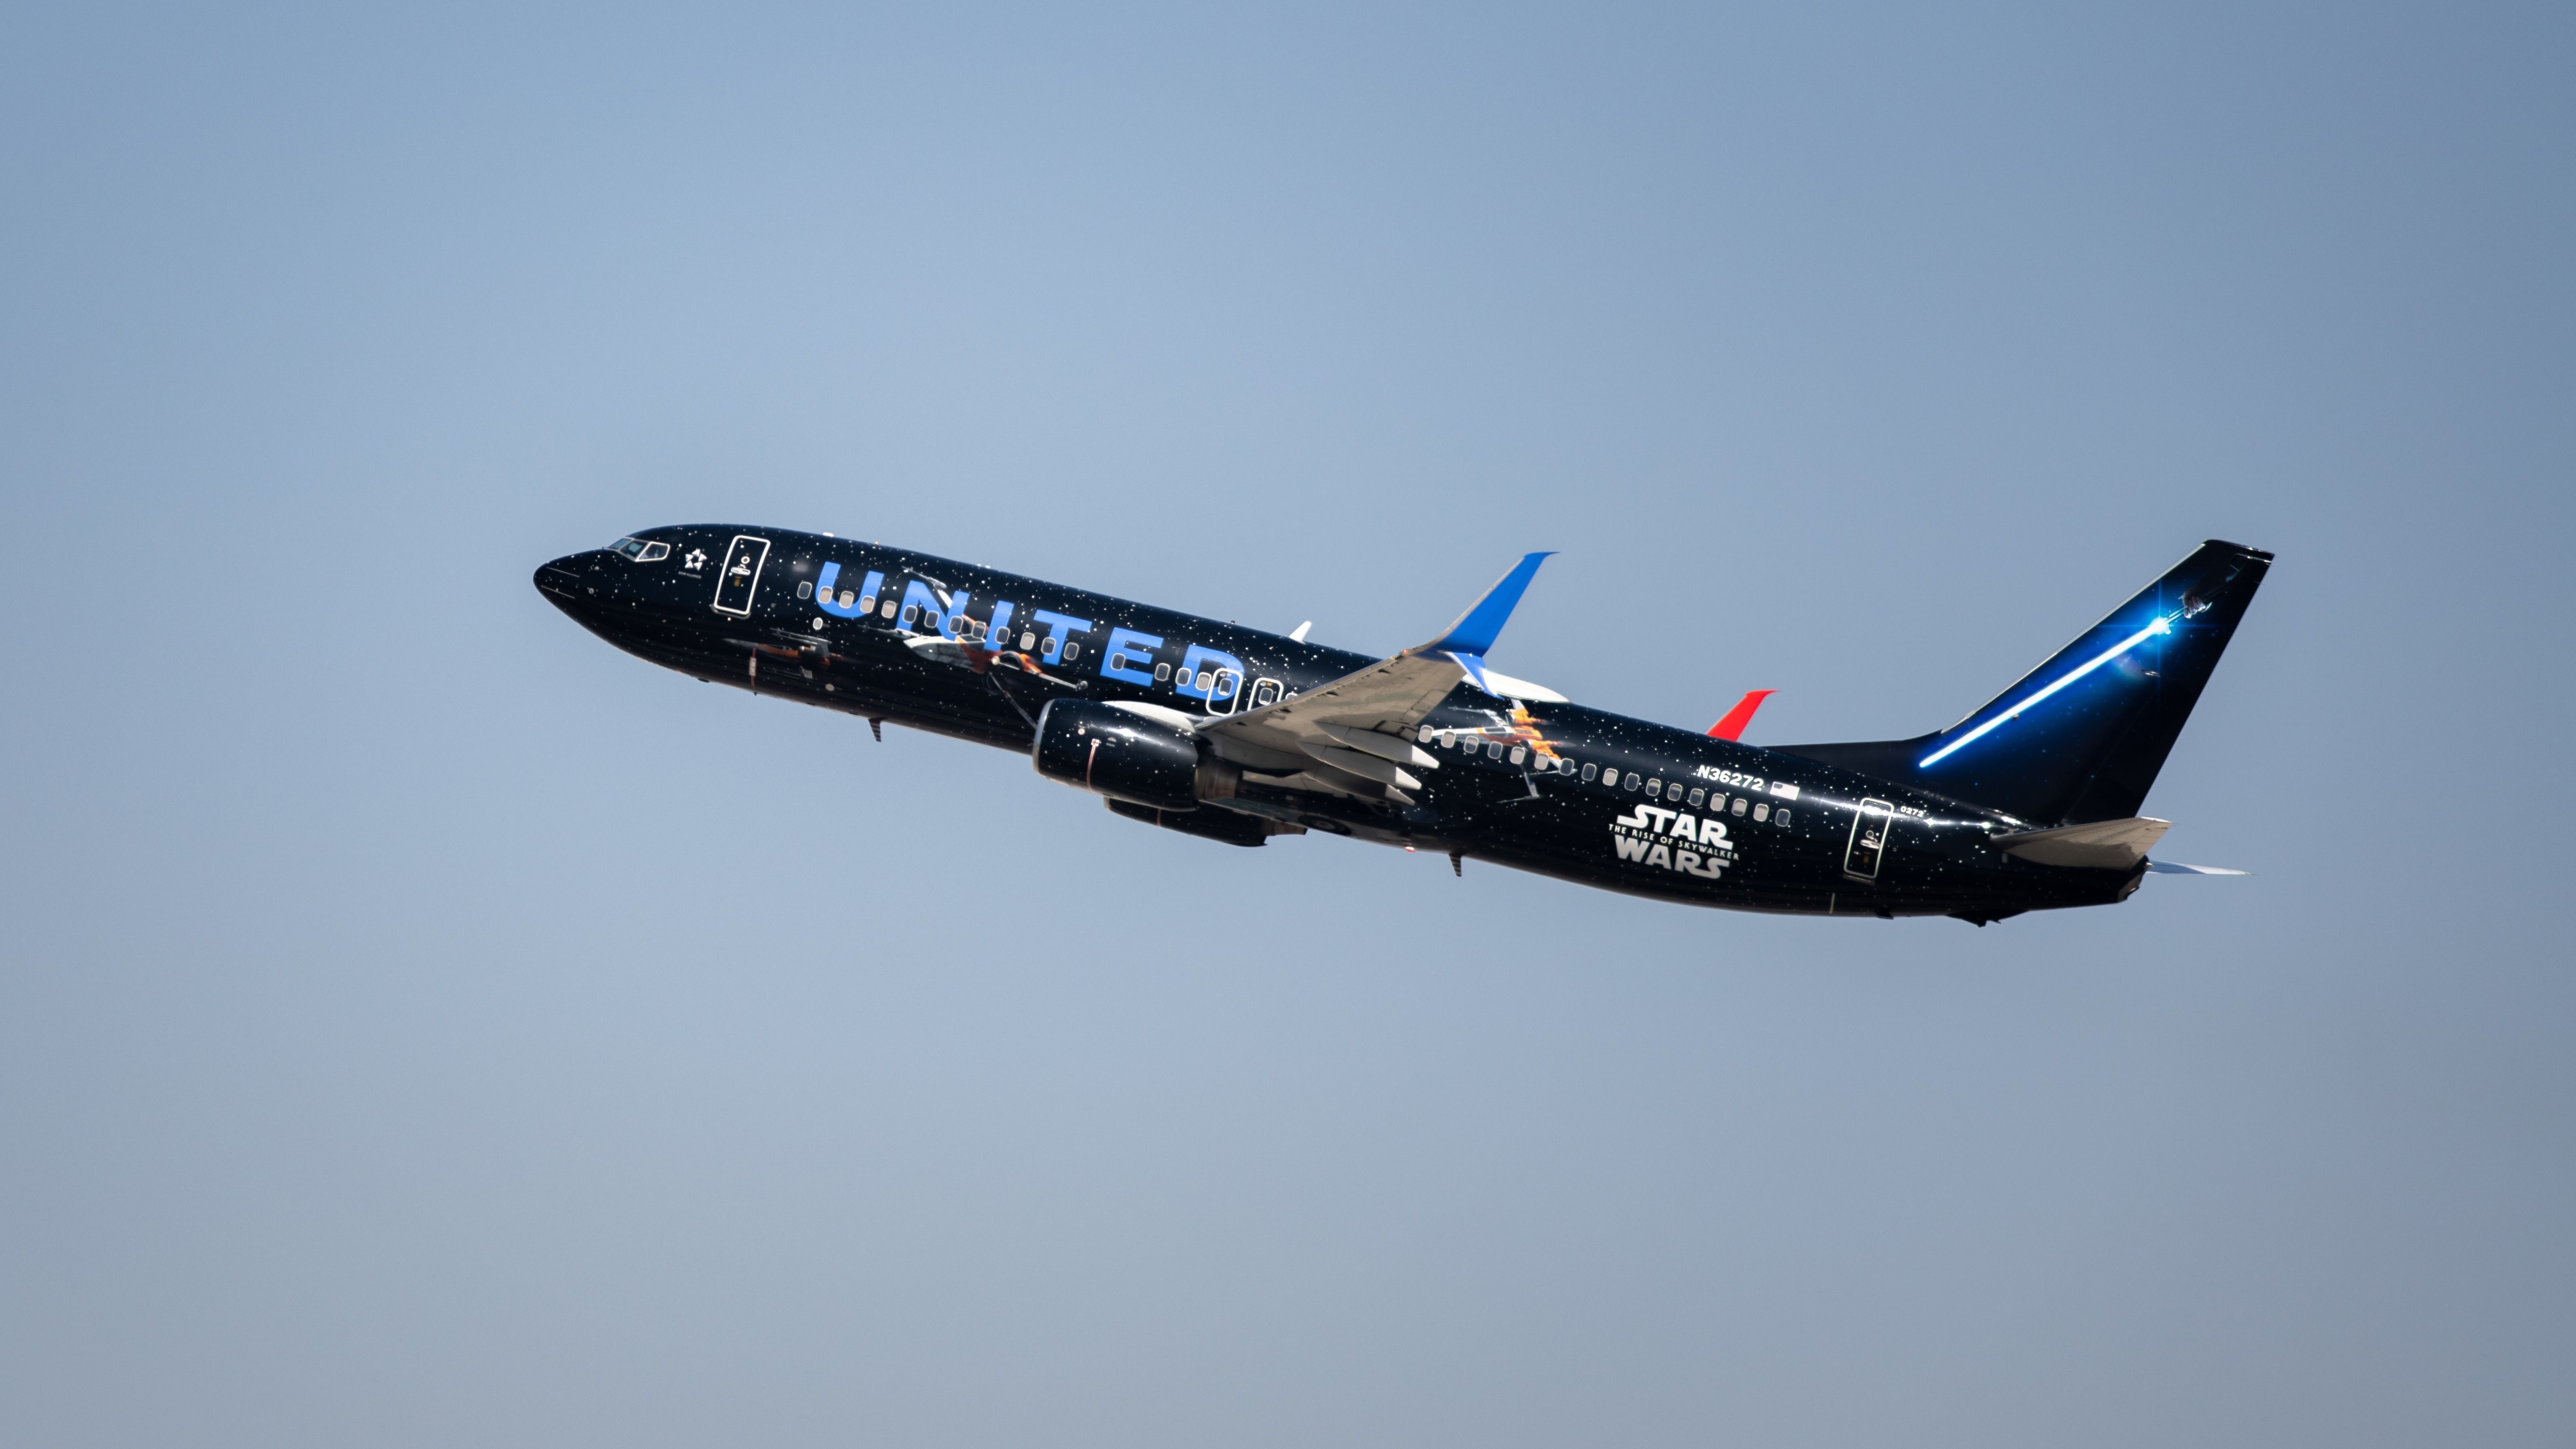 A United Airlines plane in Star Wars Livery flying in the sky.